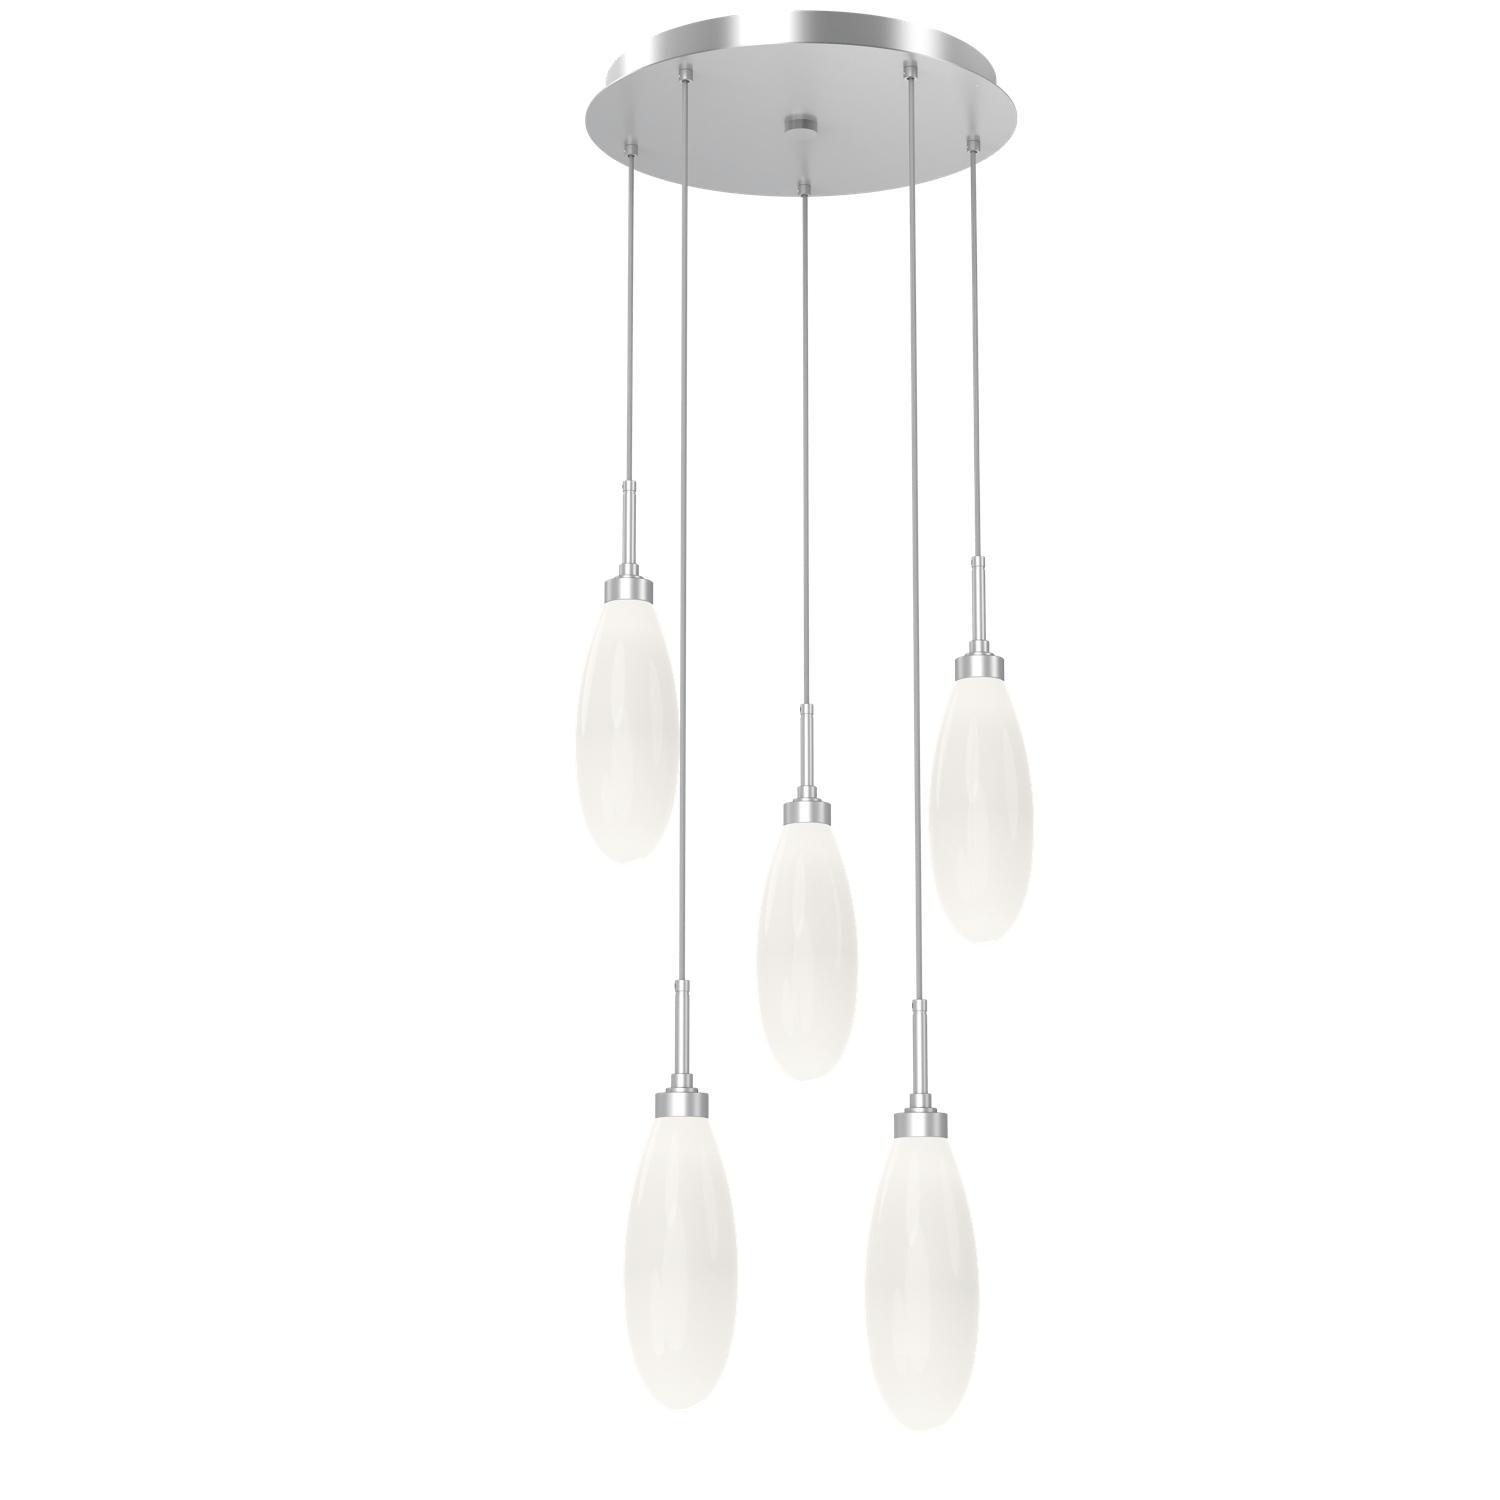 CHB0071-05-CS-WL-LL-Hammerton-Studio-Fiori-5-light-round-pendant-chandelier-with-classic-silver-finish-and-opal-white-glass-shades-and-LED-lamping